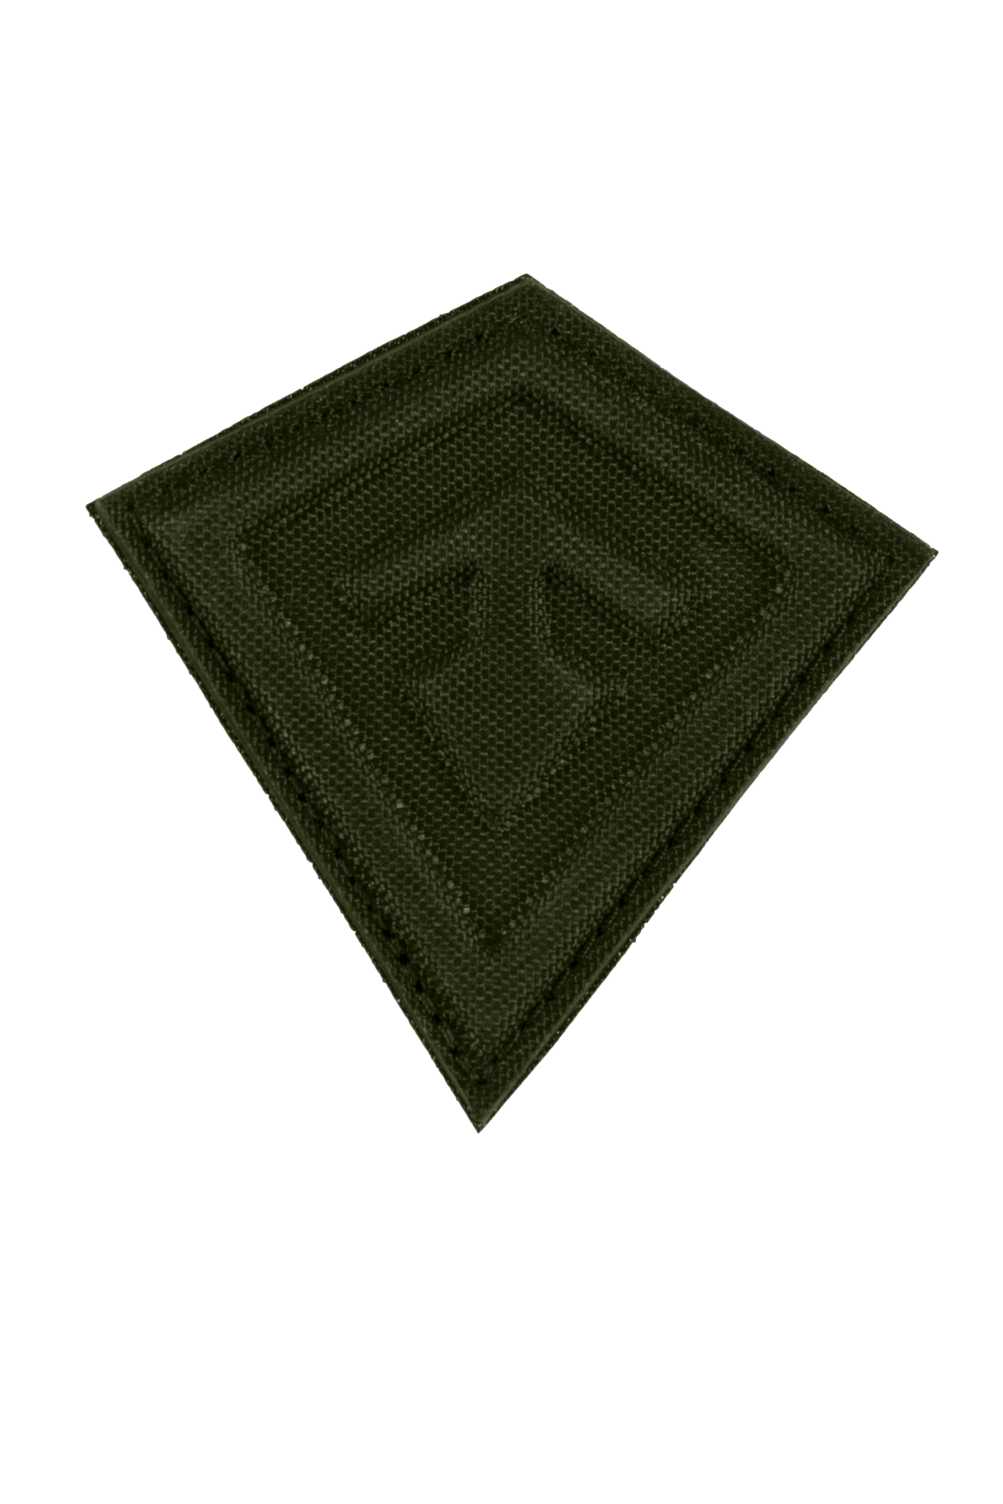 First Tactical Compress Mold Spear Patch